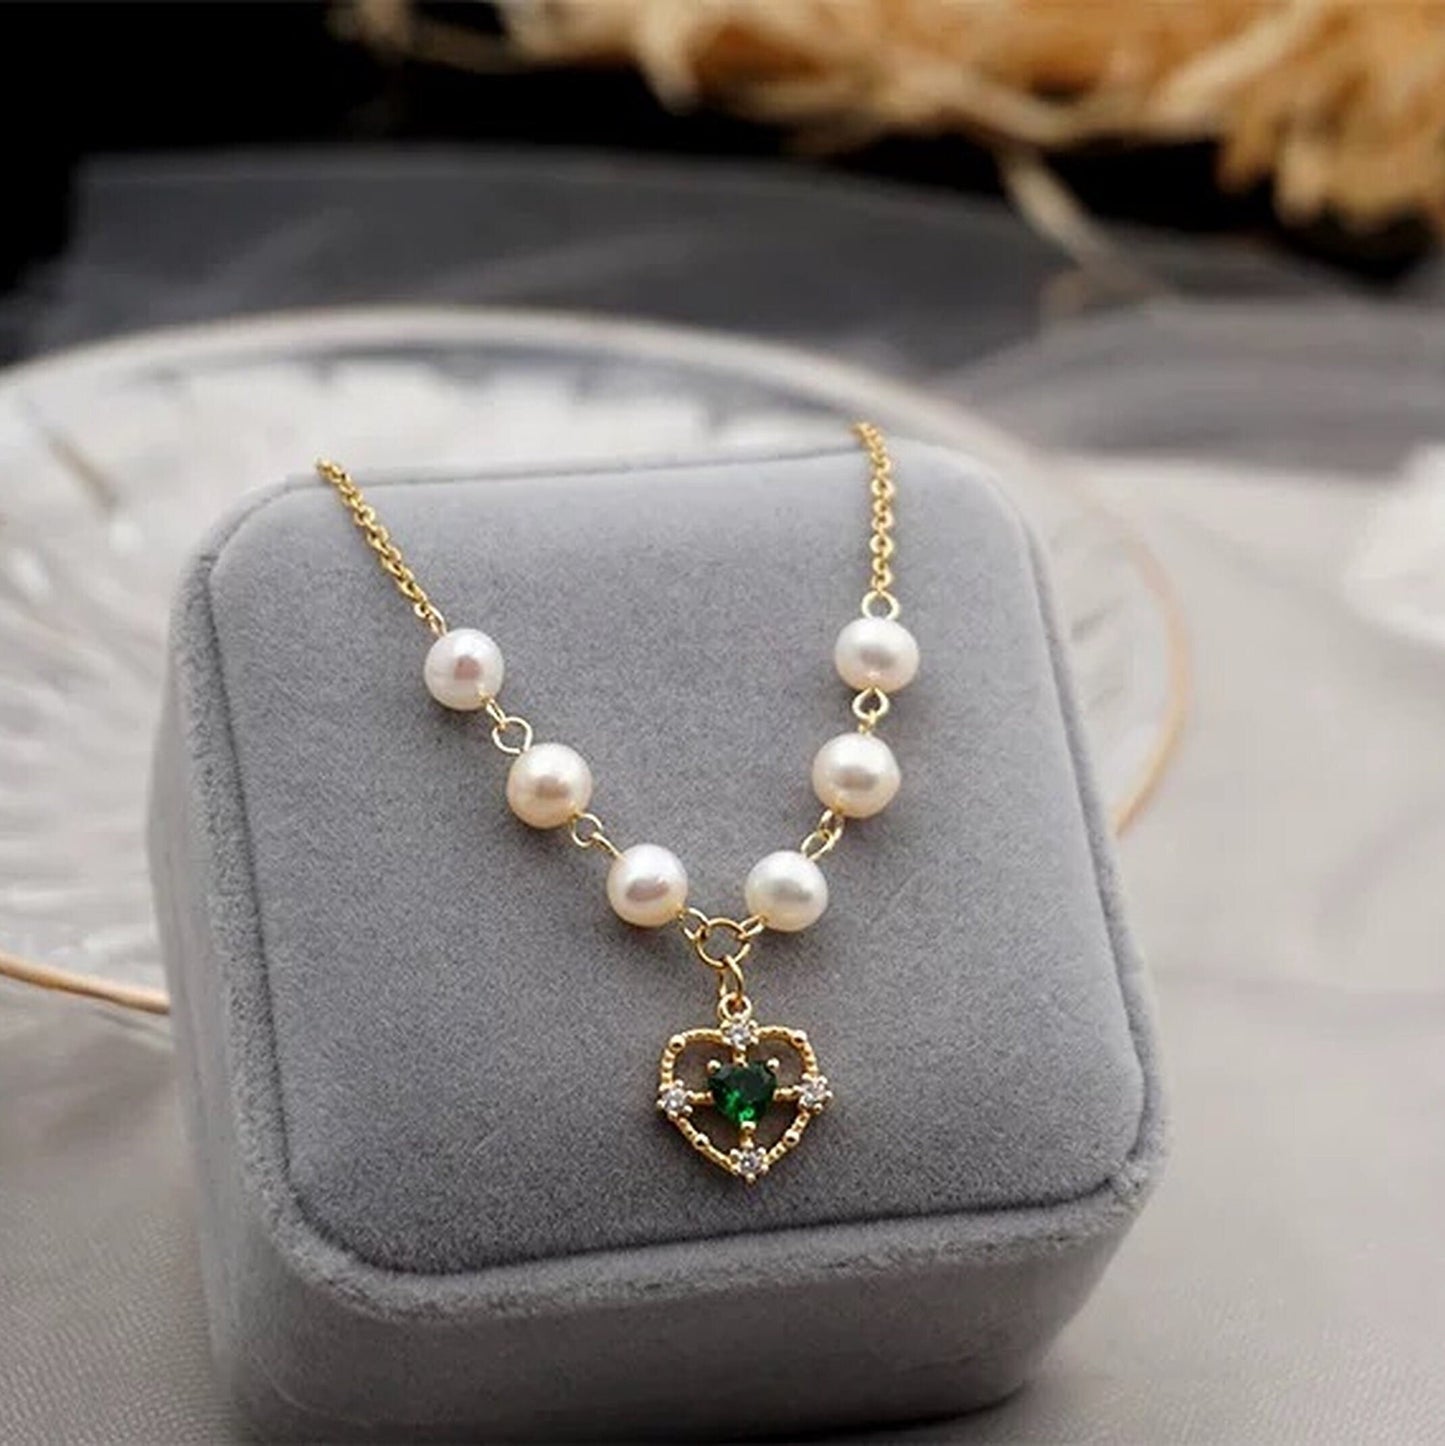 Emerald gold natural pearl necklace, Emerald pendant necklace, Dainty green emerald cz necklace, Bridesmaid wedding bridal necklace gifts